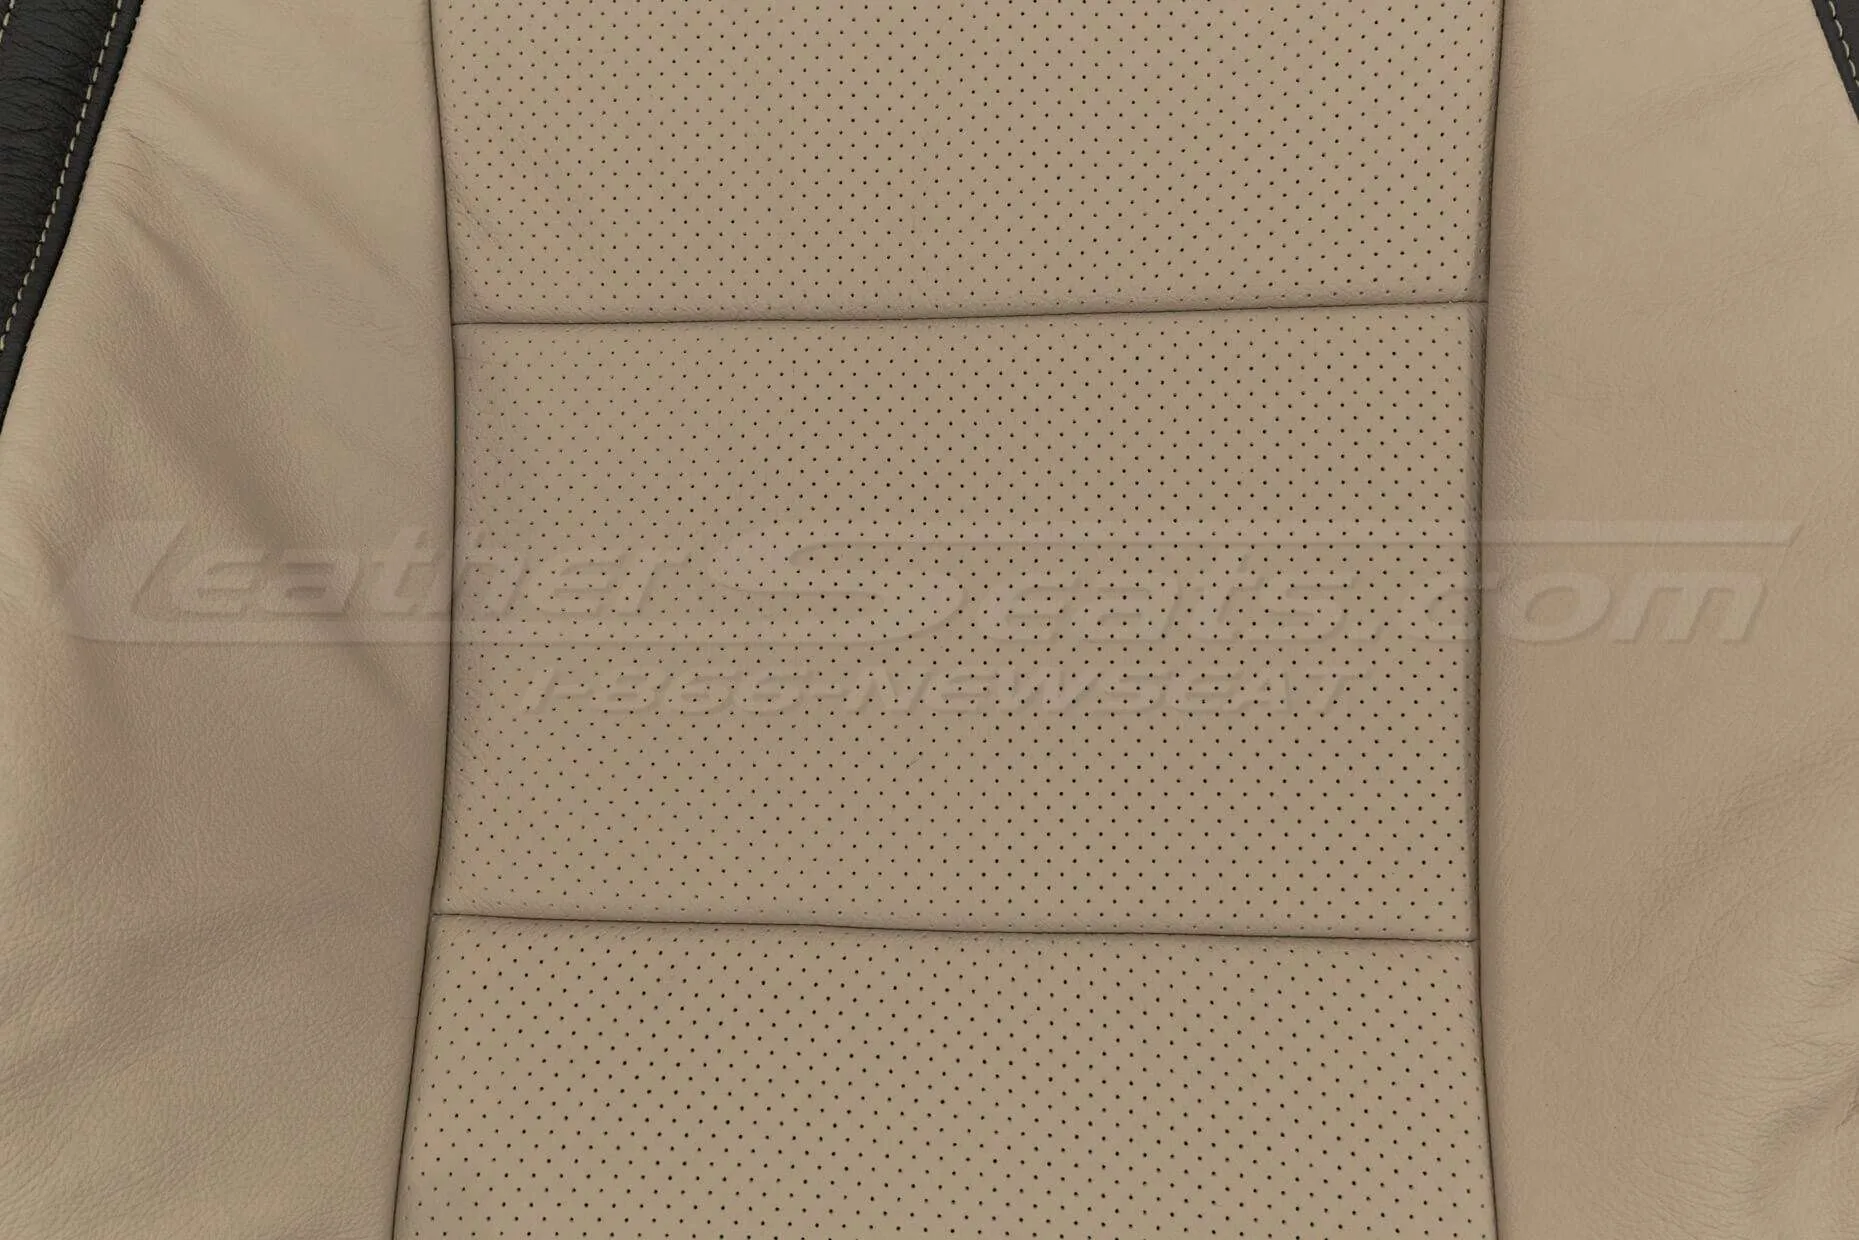 Perforated Body Section of backrest